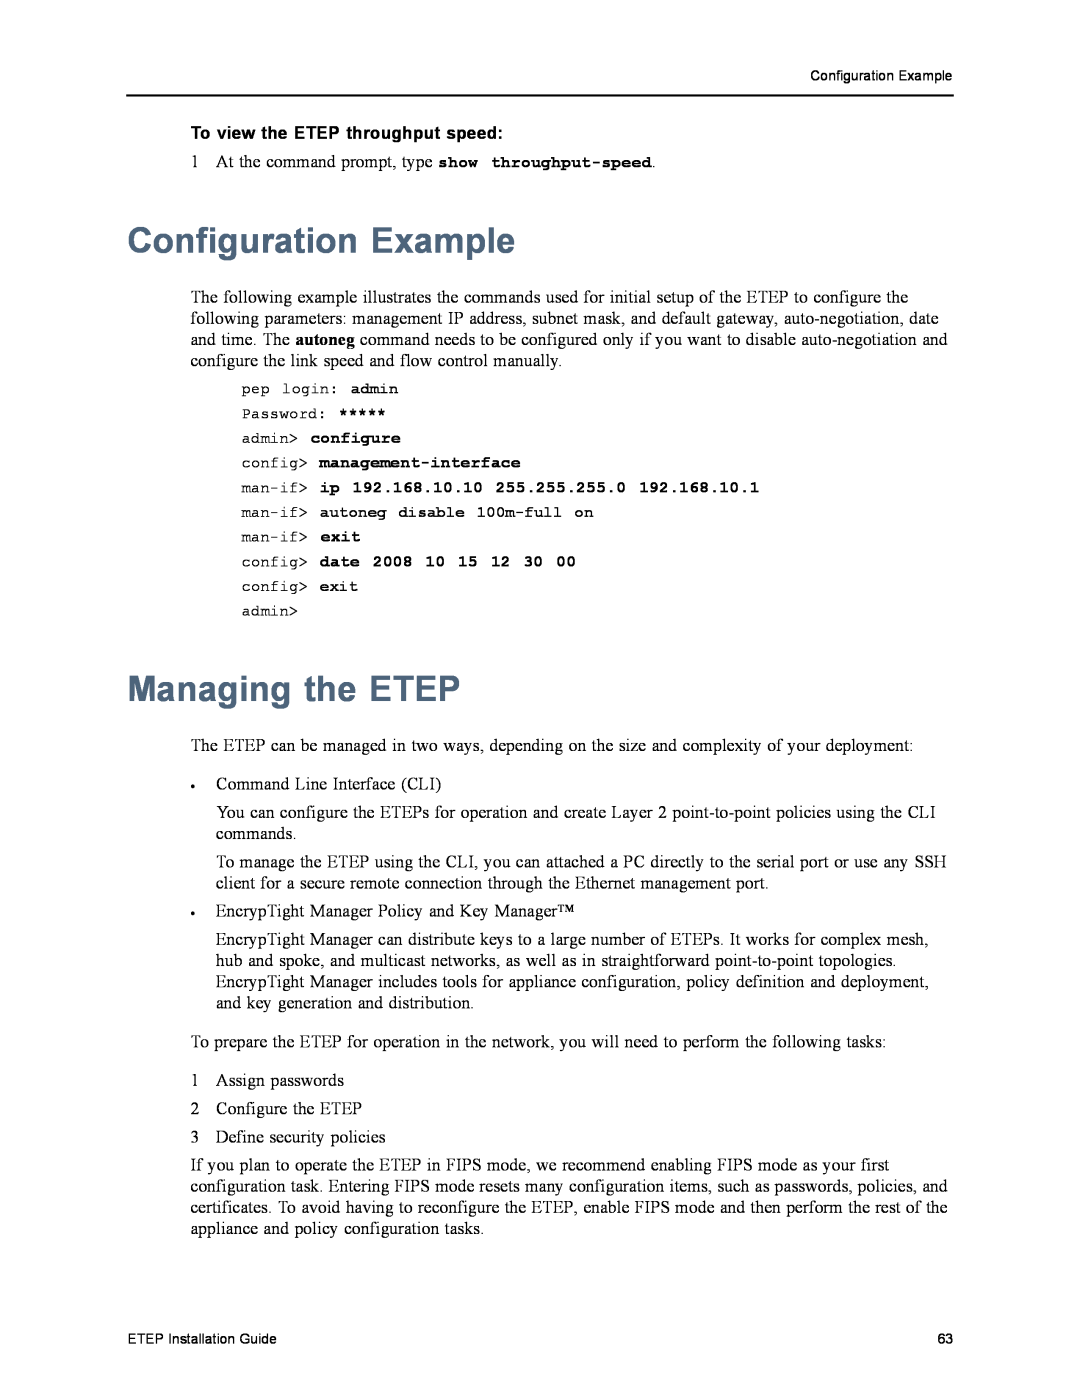 Black Box ET10000A, ET1000A, ET0010A, ET0100A Configuration Example, Managing the ETEP, To view the ETEP throughput speed 